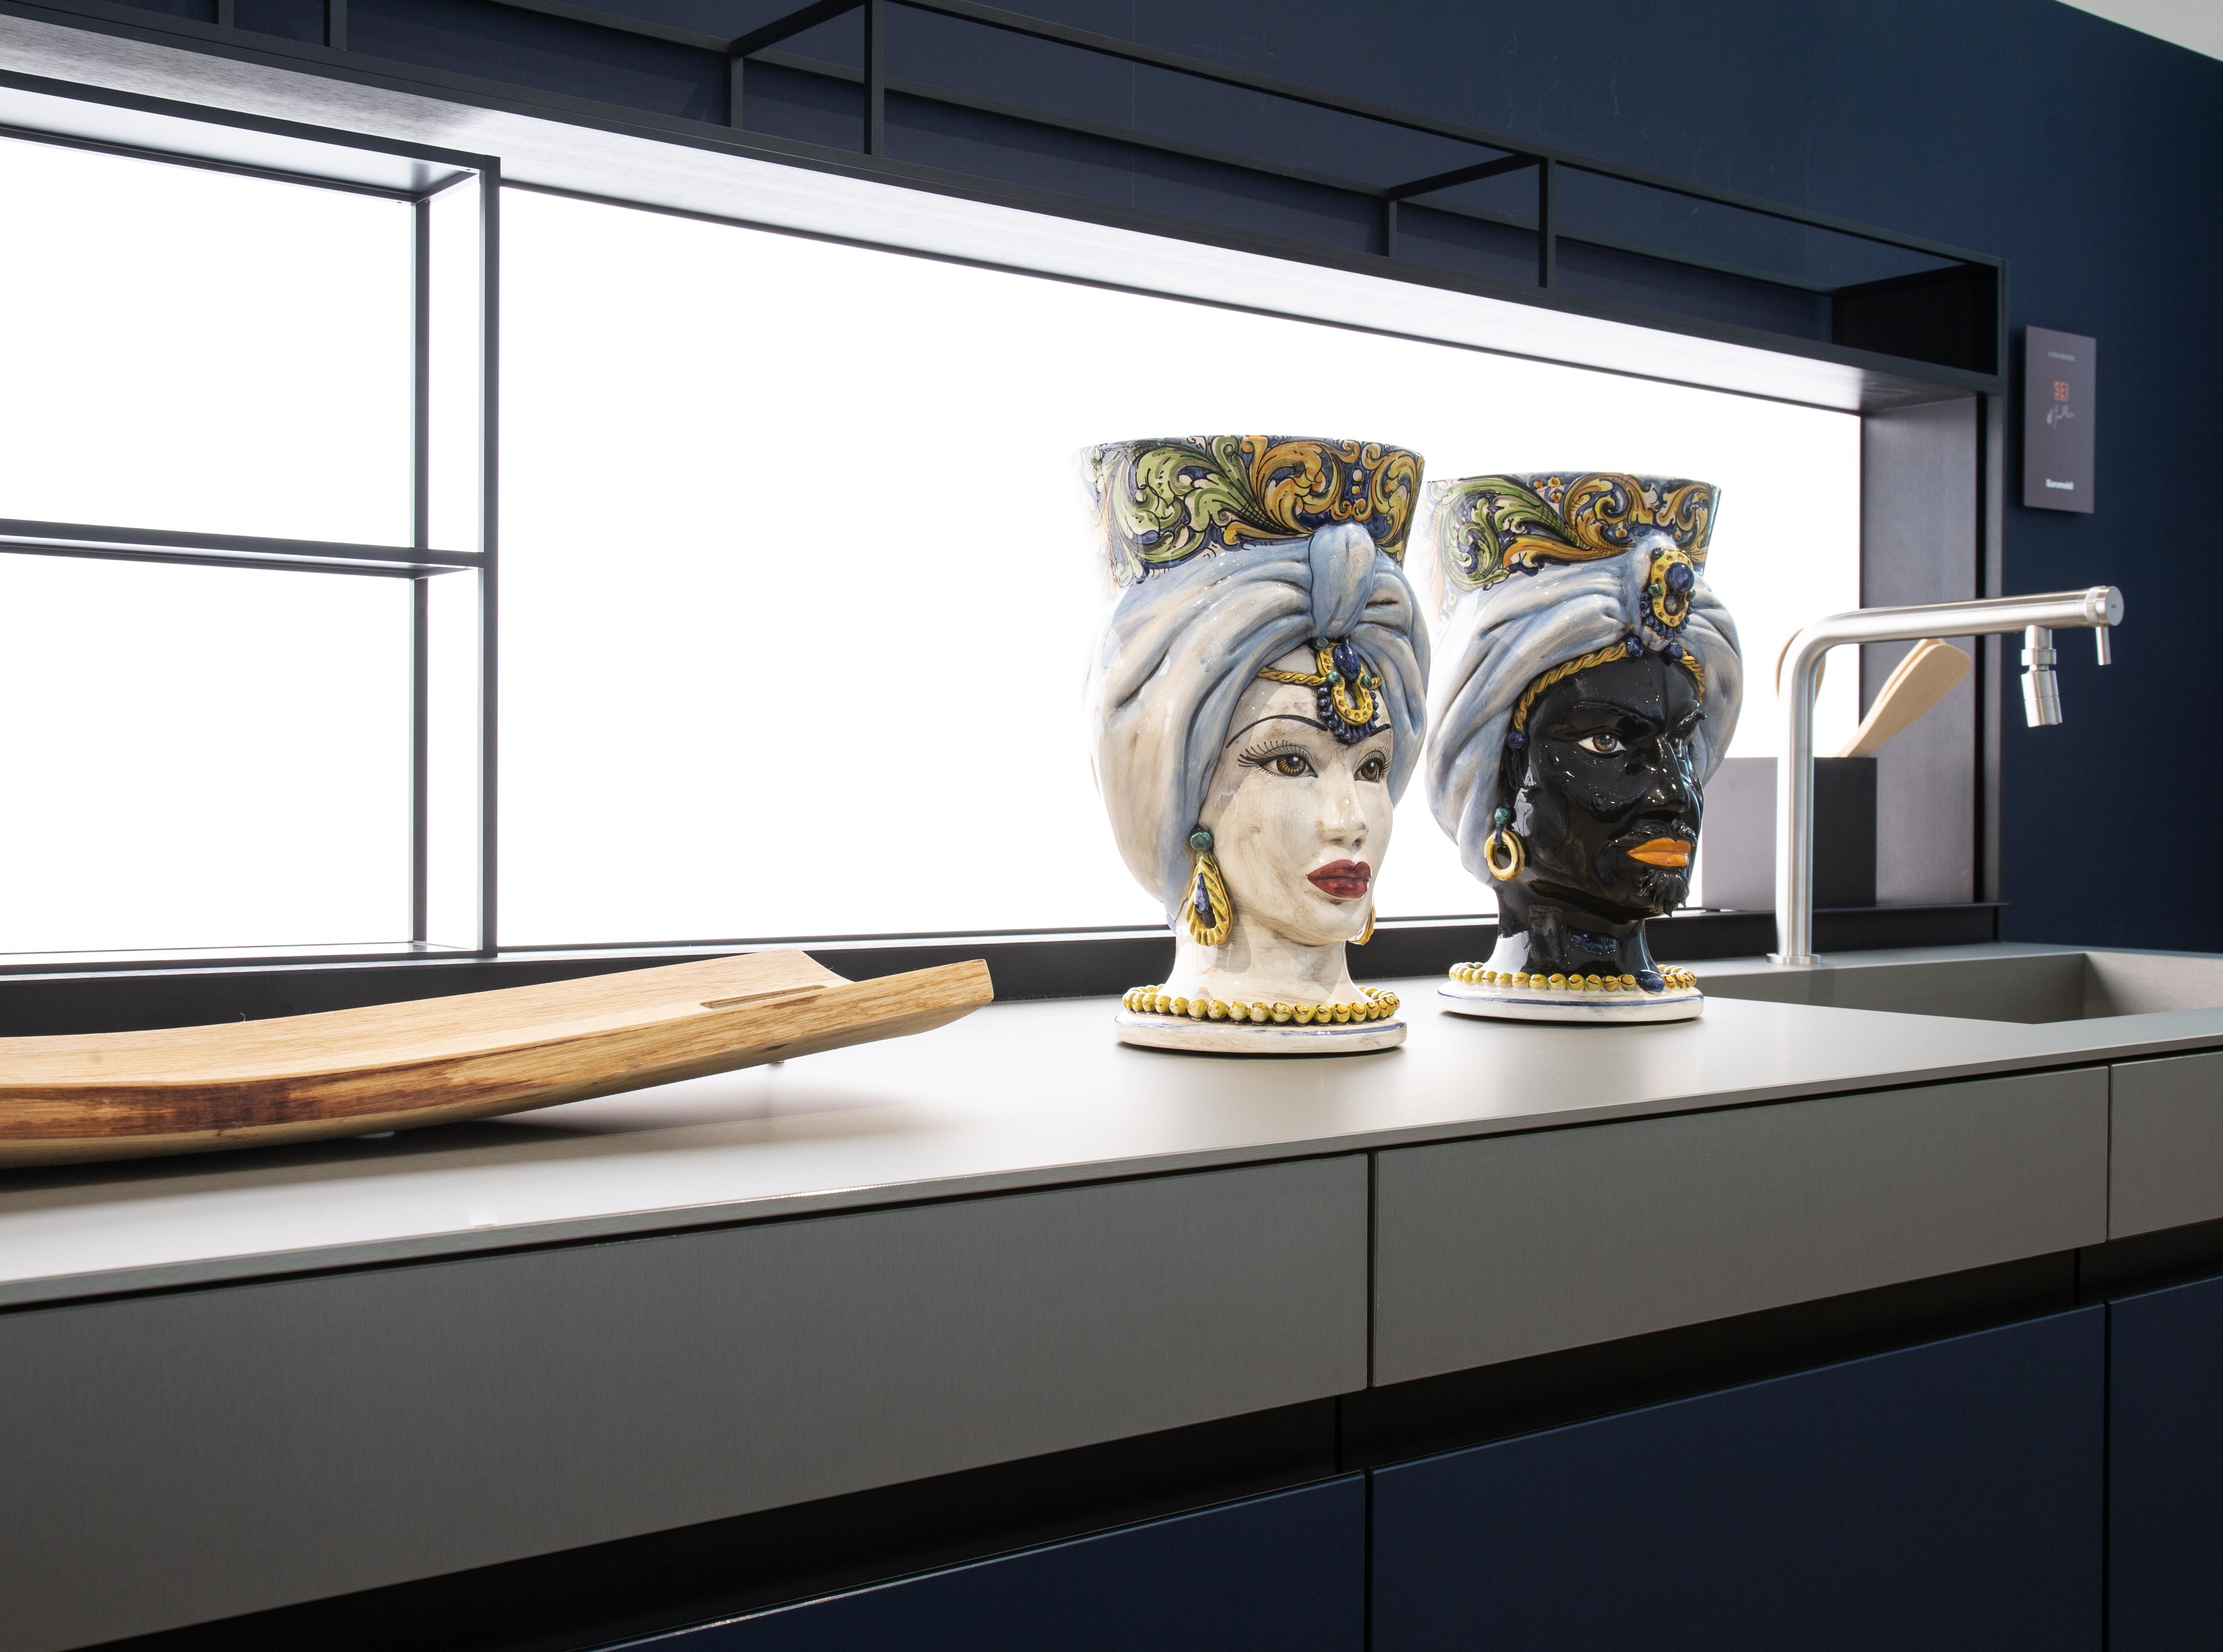 The Collection

This collection offers ideas for contemporary décor through sophisticated revelations of art bound to the tradition of ceramics of Caltagirone, objets d’art that combine history and design.
The extreme attention to details,